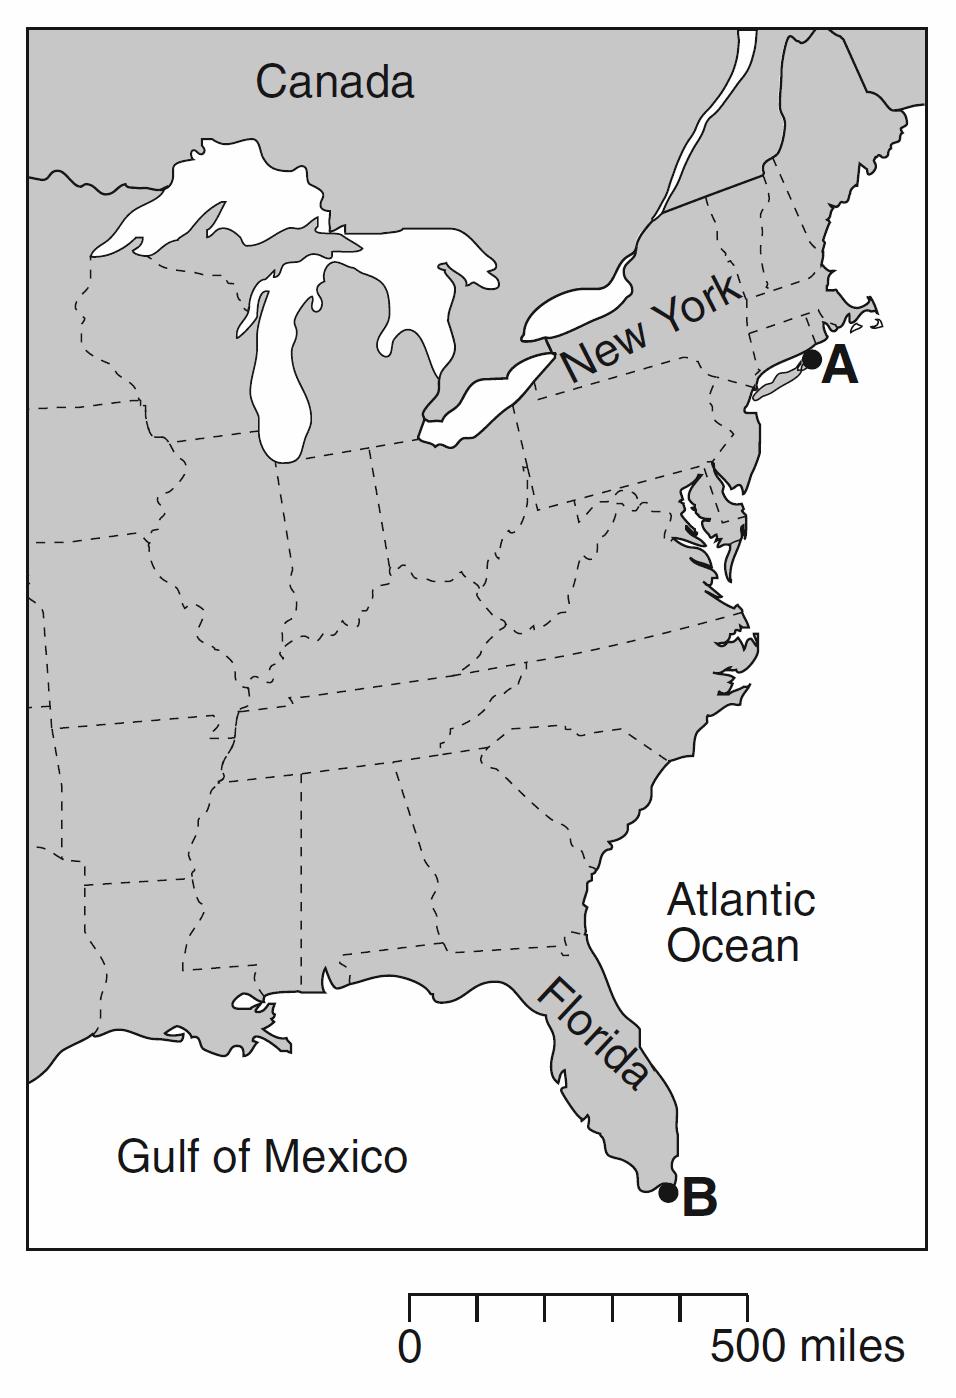 24. The map below shows an eastern portion of North America. Points A and B represent locations on the eastern shoreline.